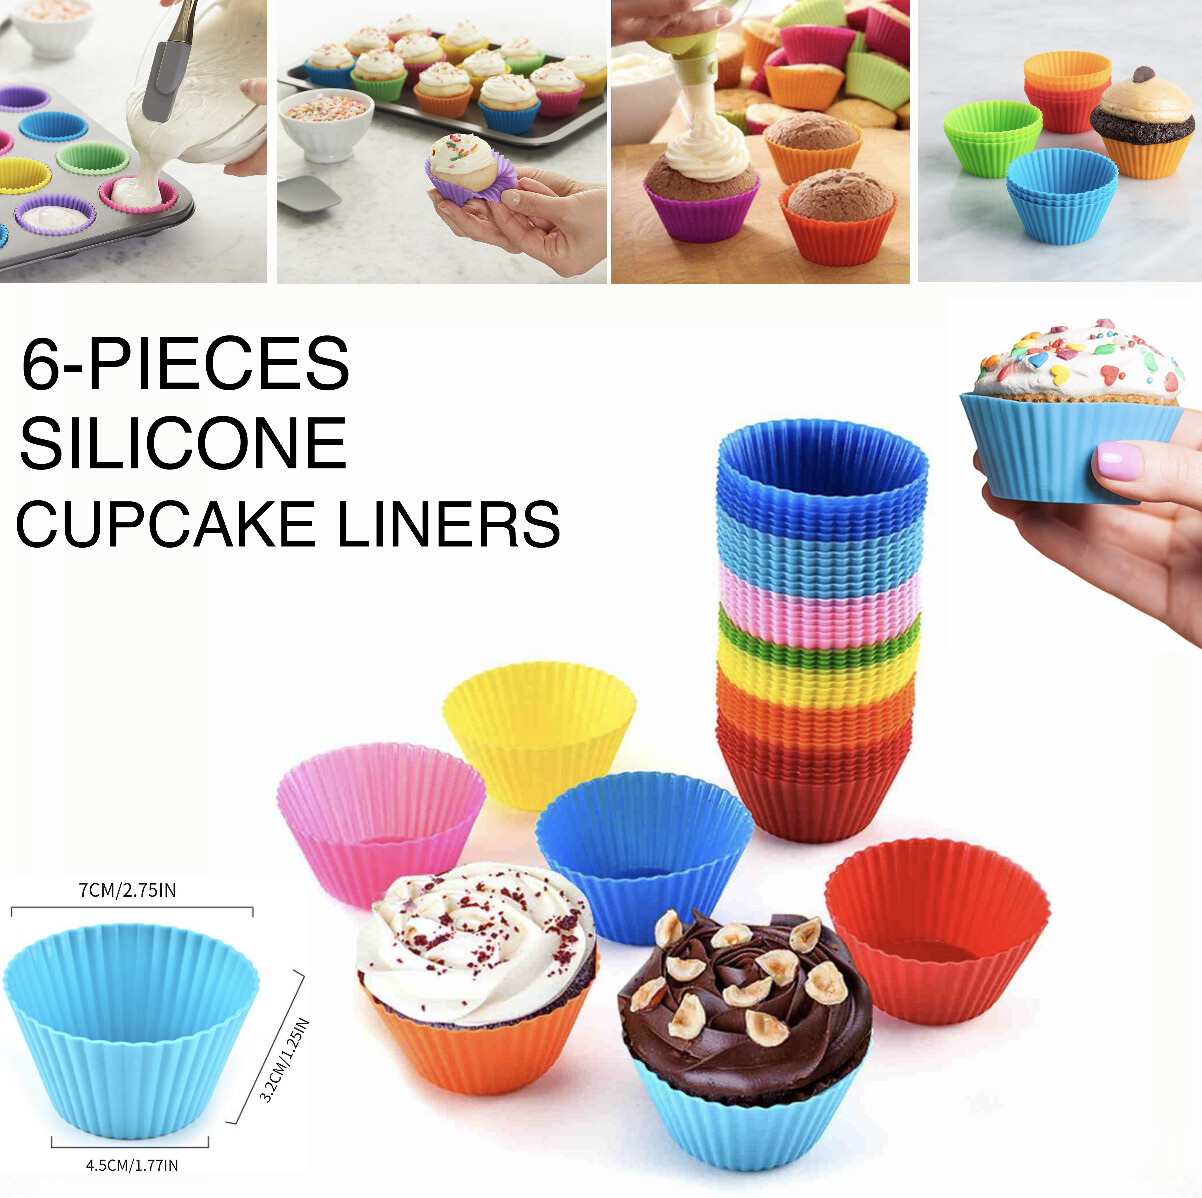 Silicone Cupcakes Liners